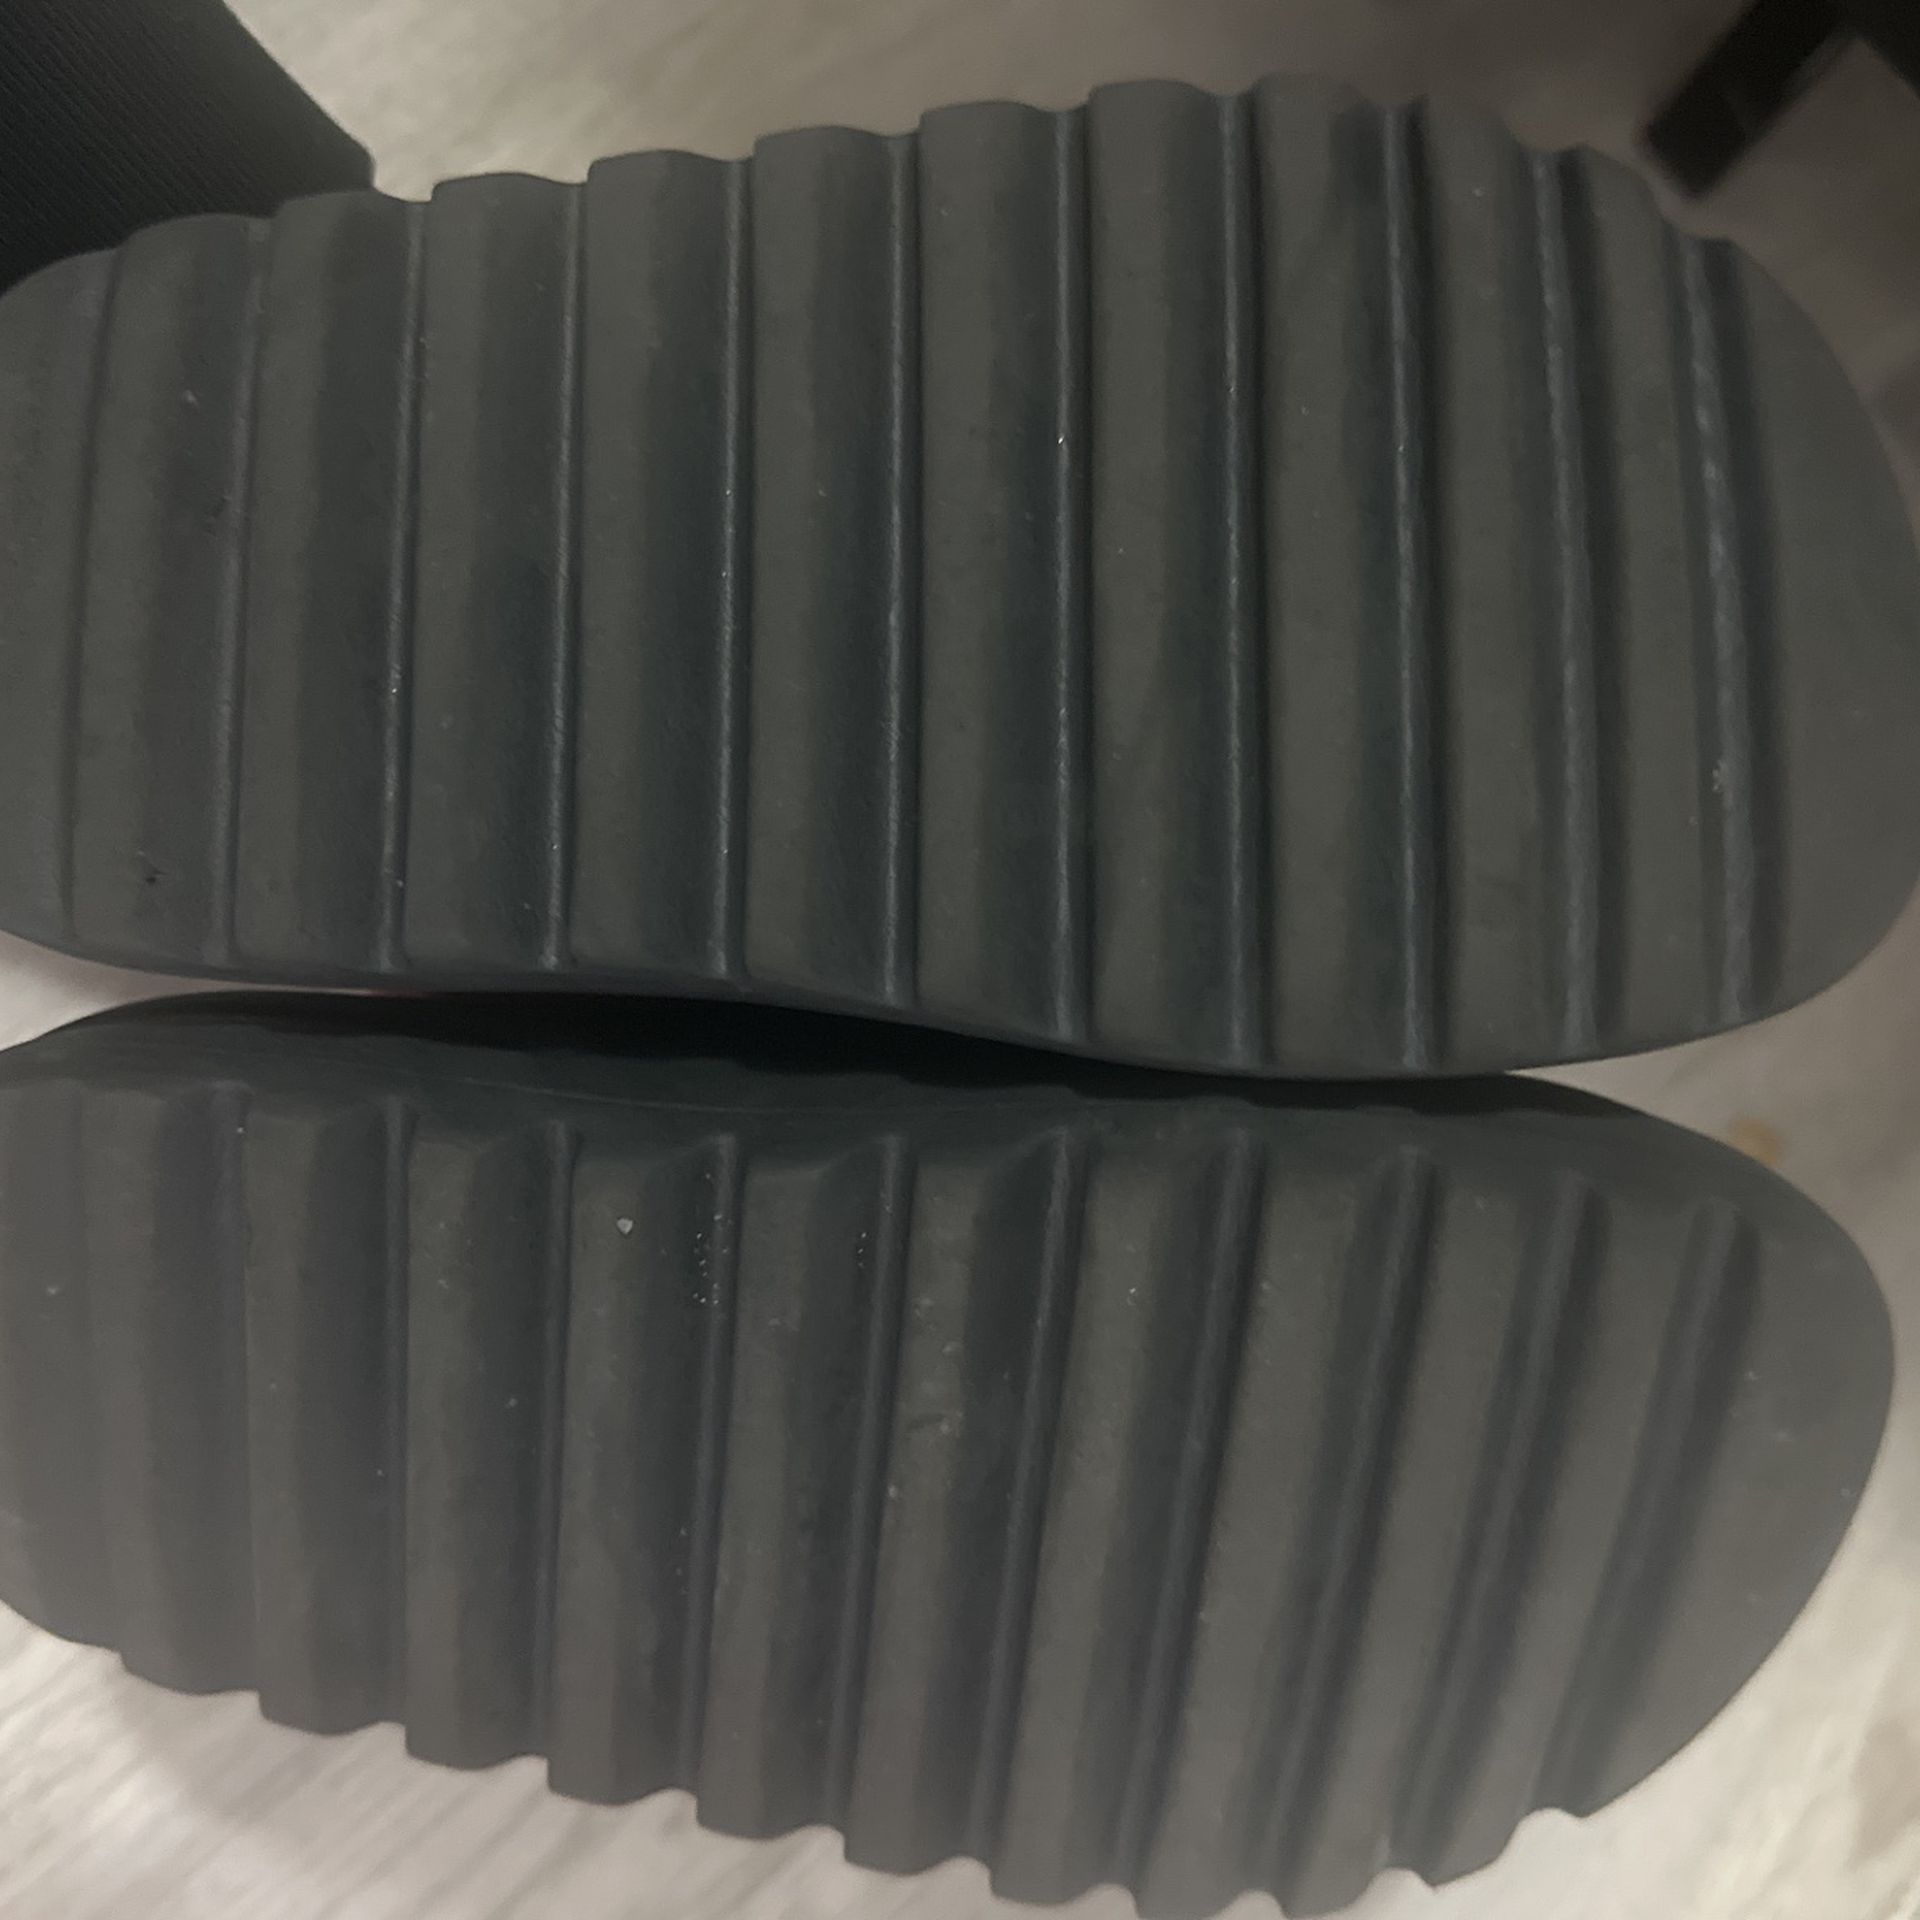 Yeezy Slides (official) Size 3 Young Boys for Sale in Yonkers, NY - OfferUp